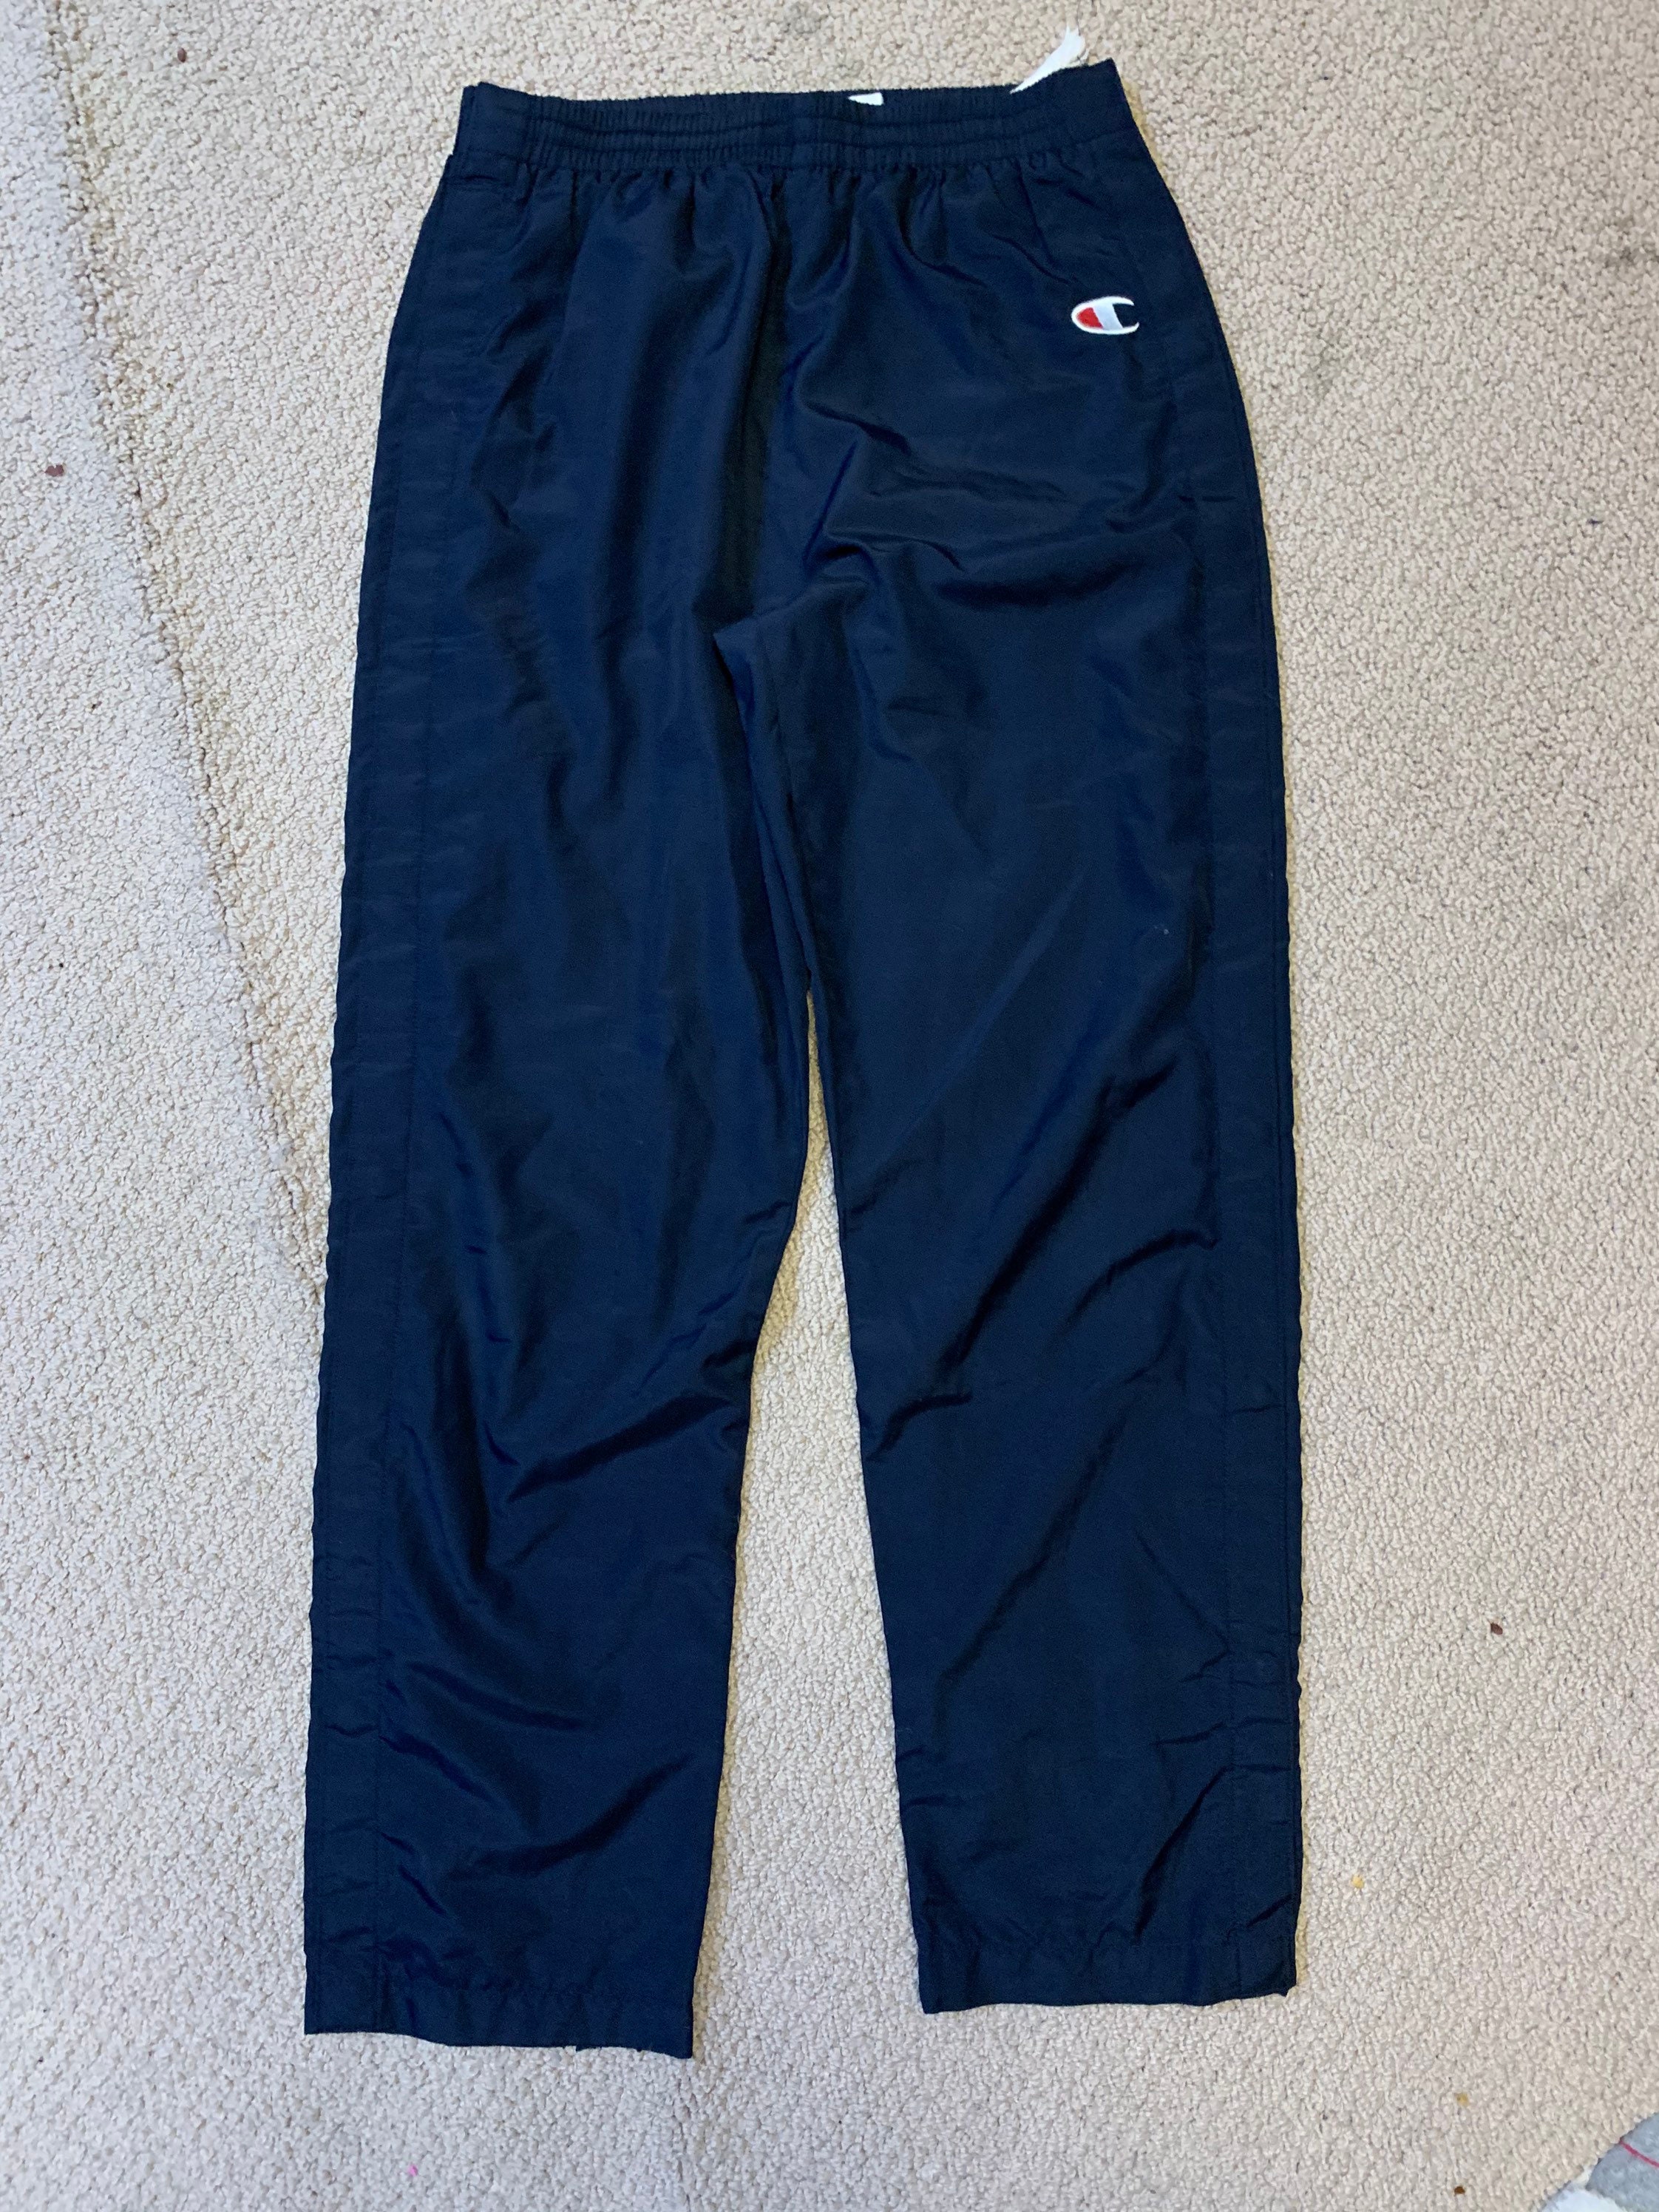 Vintage Champion Track Pants w/ Snap Buttons | Etsy